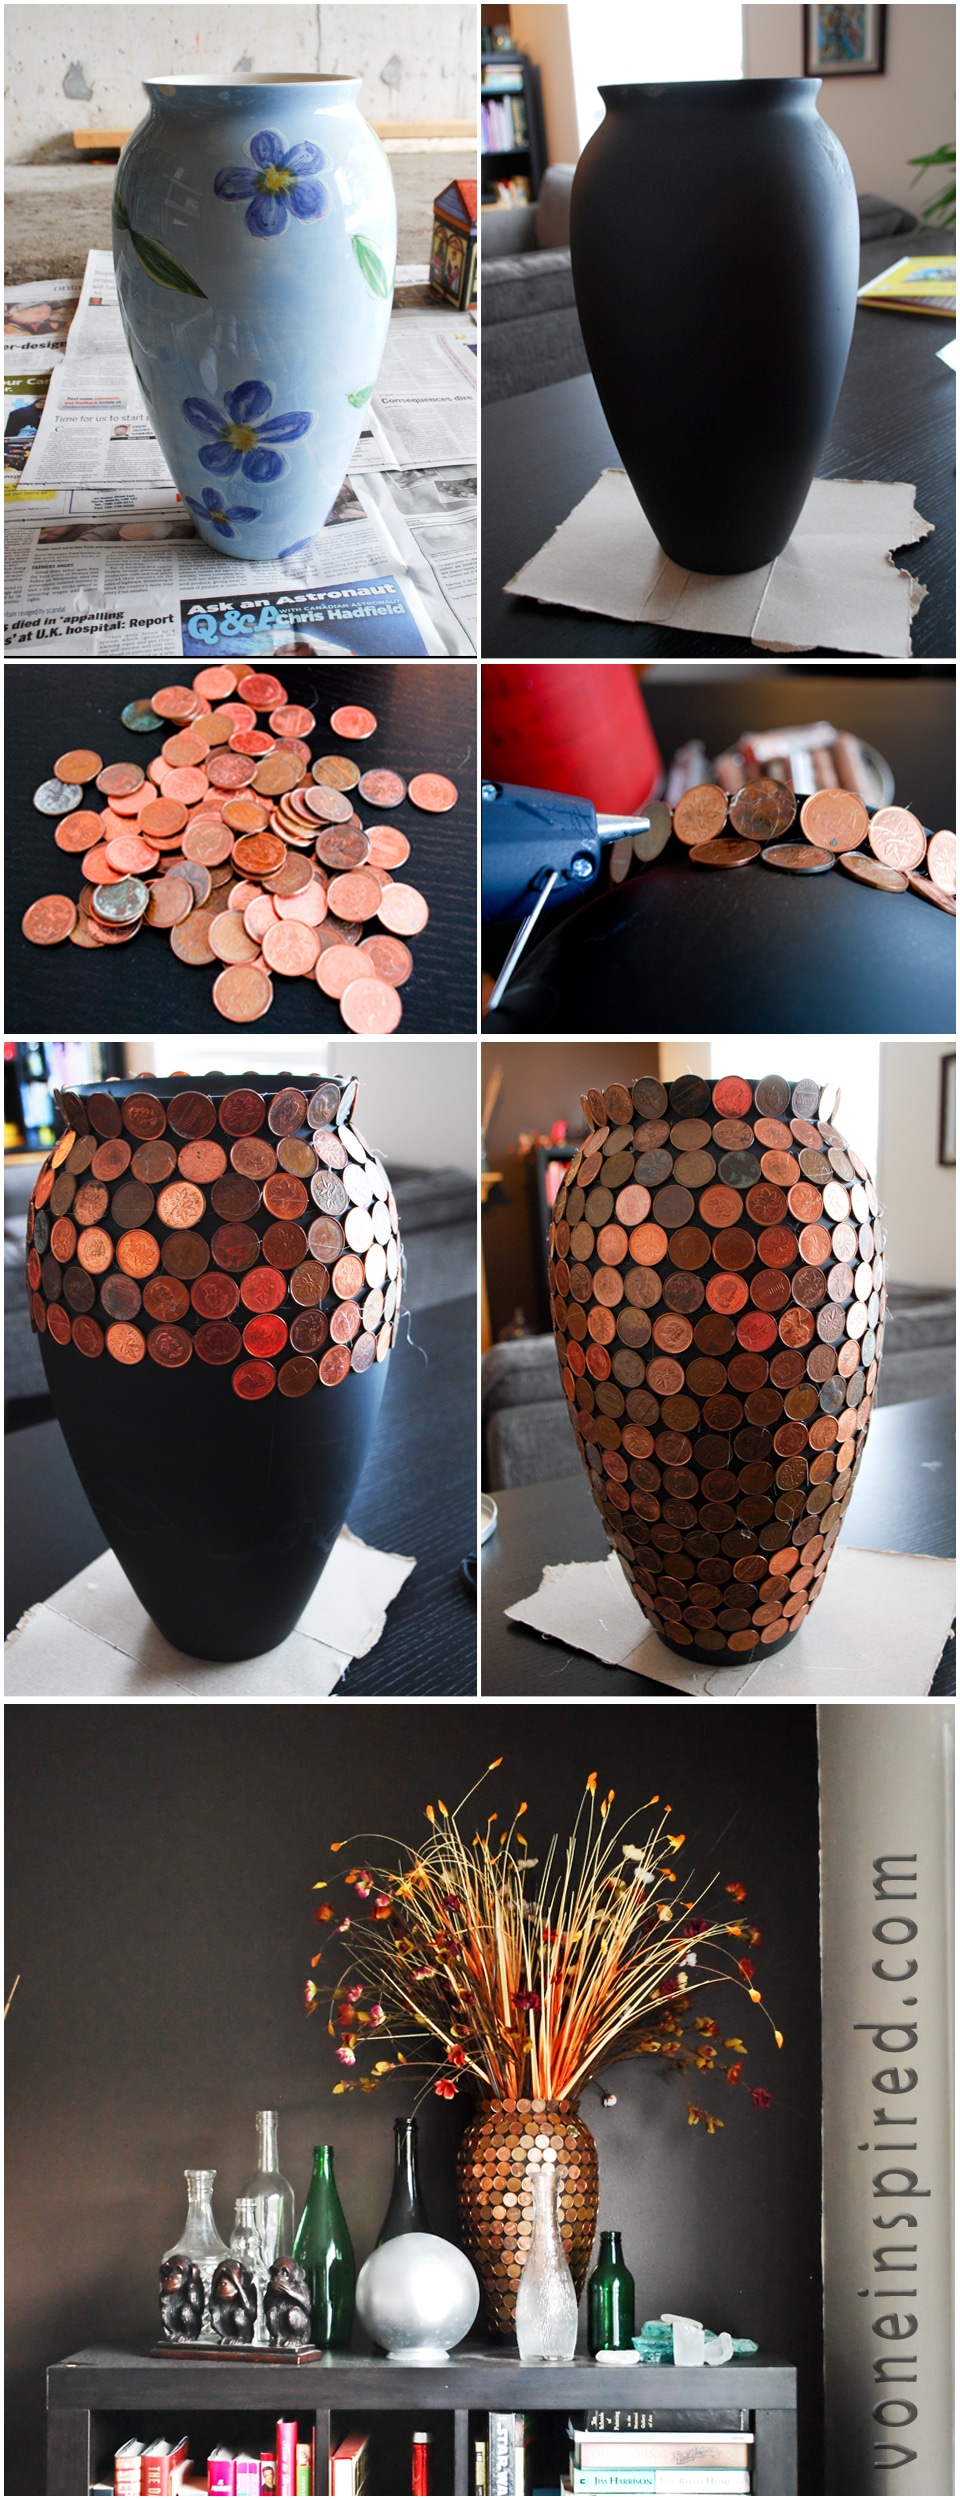 The-Steps-to-Make-a-Penny-Vase-from-VoneInspired